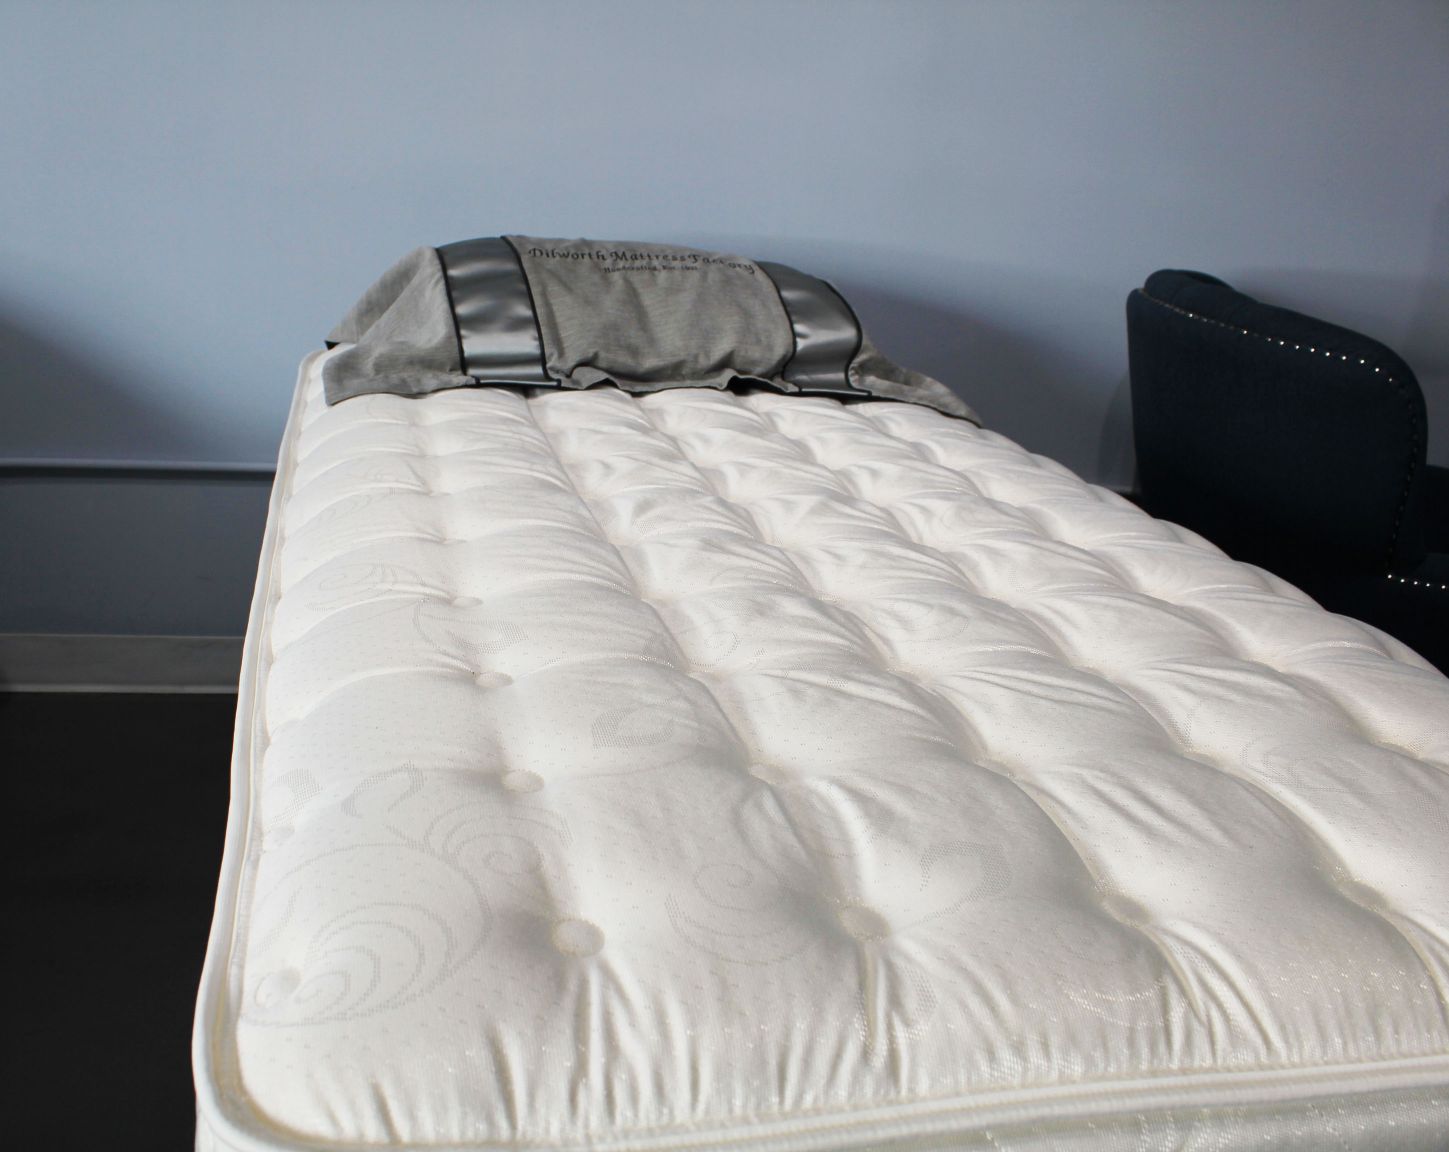 Lennox Mattress by Dilworth Mattress Factory Offers a Softer Surface with Balancing Plush Comfort and Firm Support.